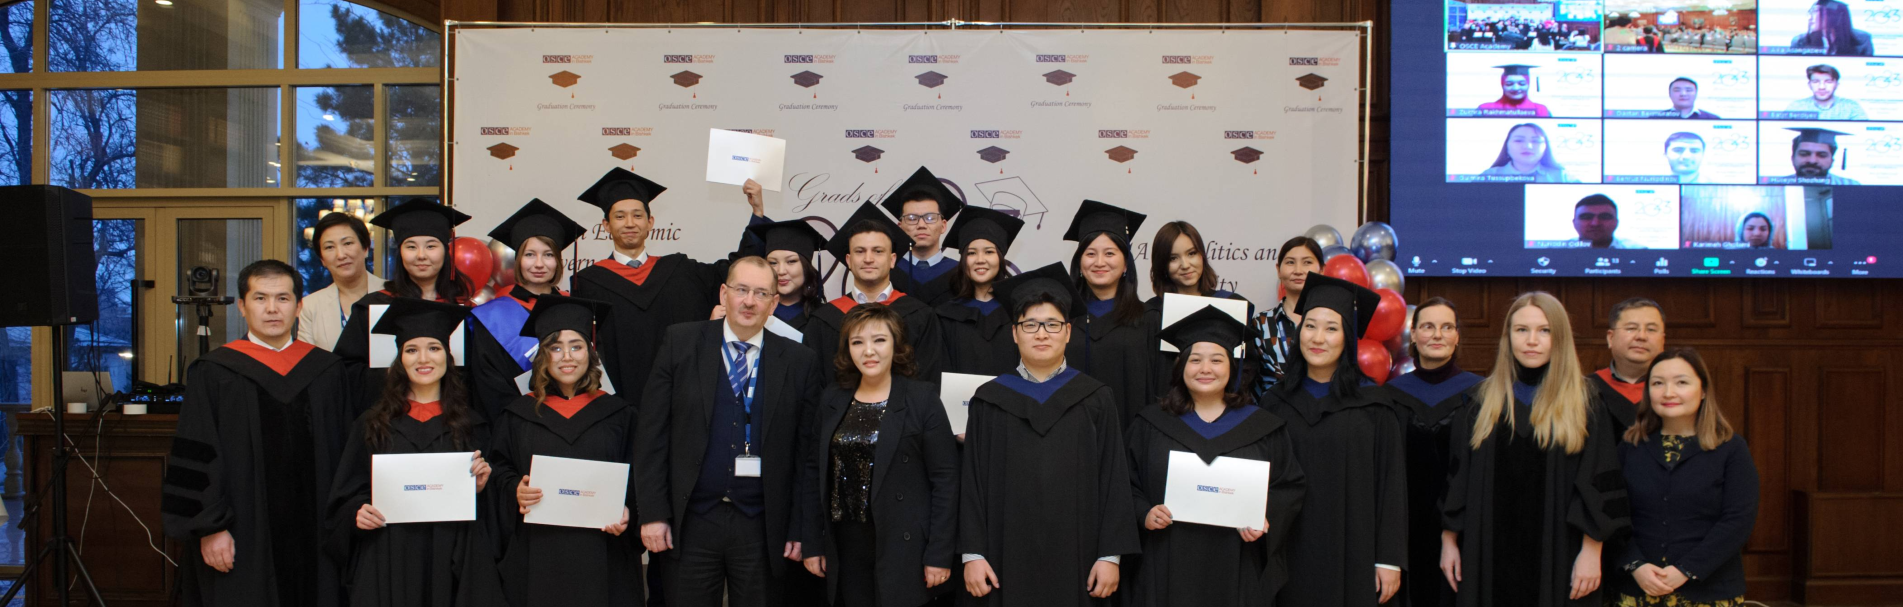 The OSCE Academy is proud of its increasing alumni network that includes over 600 young professionals in Central Asia, Afghanistan and Mongolia